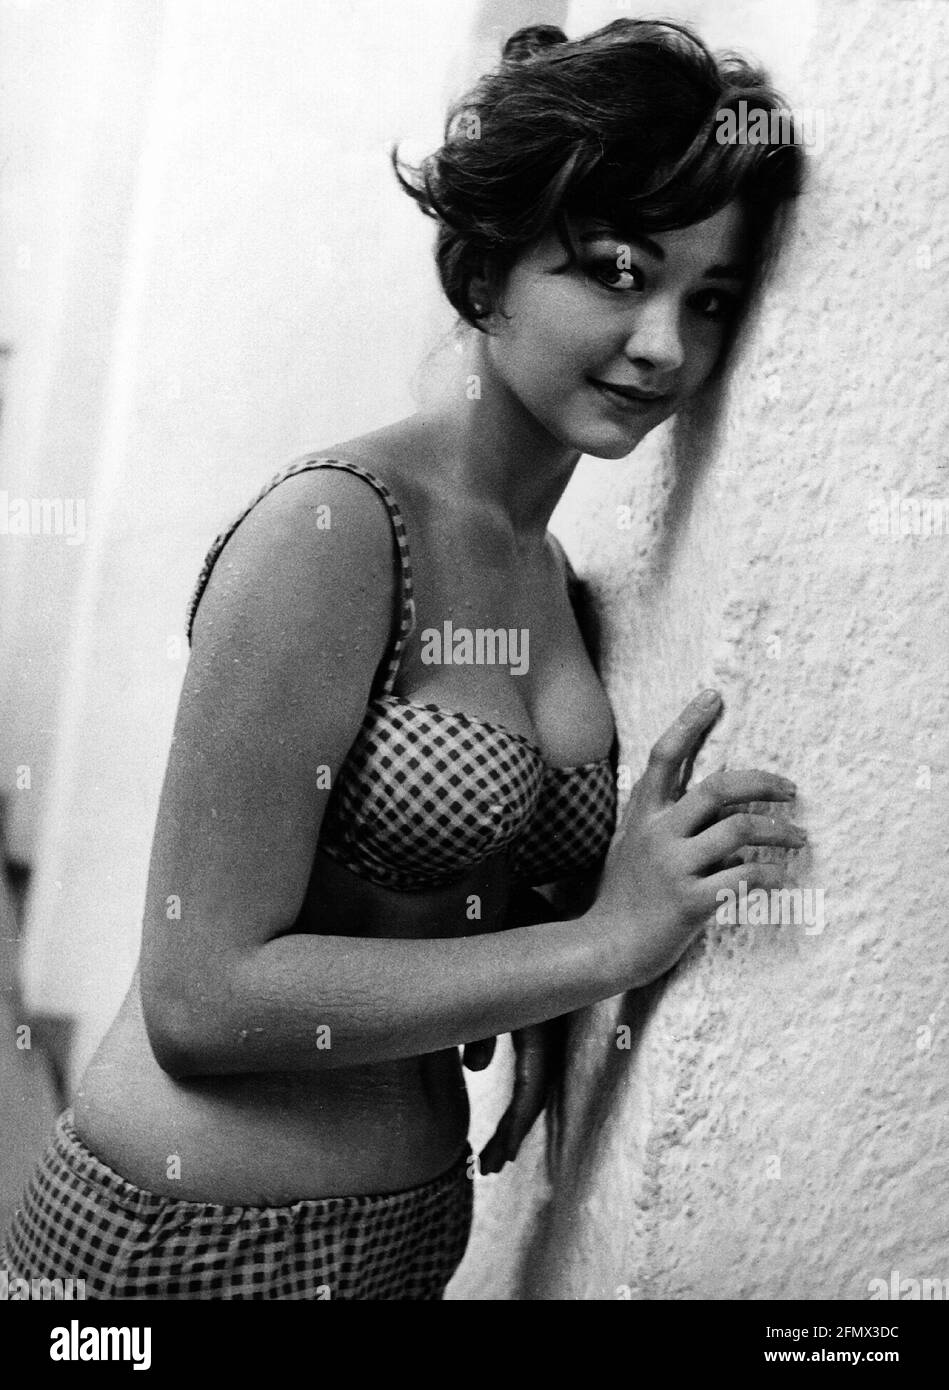 Kaufmann, Christine, 11.1.1945 - 28.3.2017, German actress, half length, wearing Bikini, 1950s, 50s, ADDITIONAL-RIGHTS-CLEARANCE-INFO-NOT-AVAILABLE Stock Photo